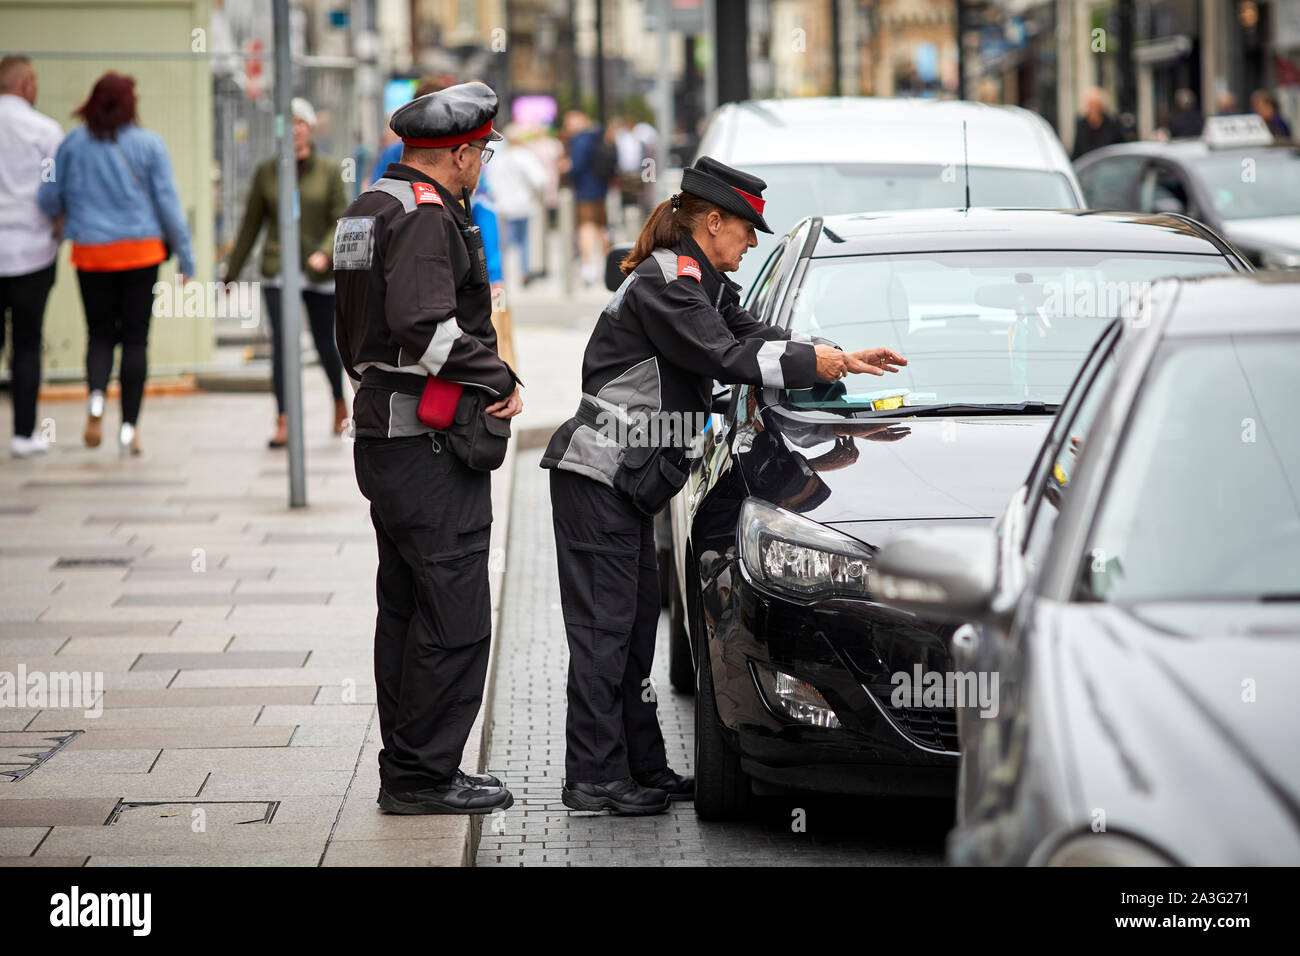 Cardiff Wales, on High Street council public servant traffic wardens giving a ticket Stock Photo